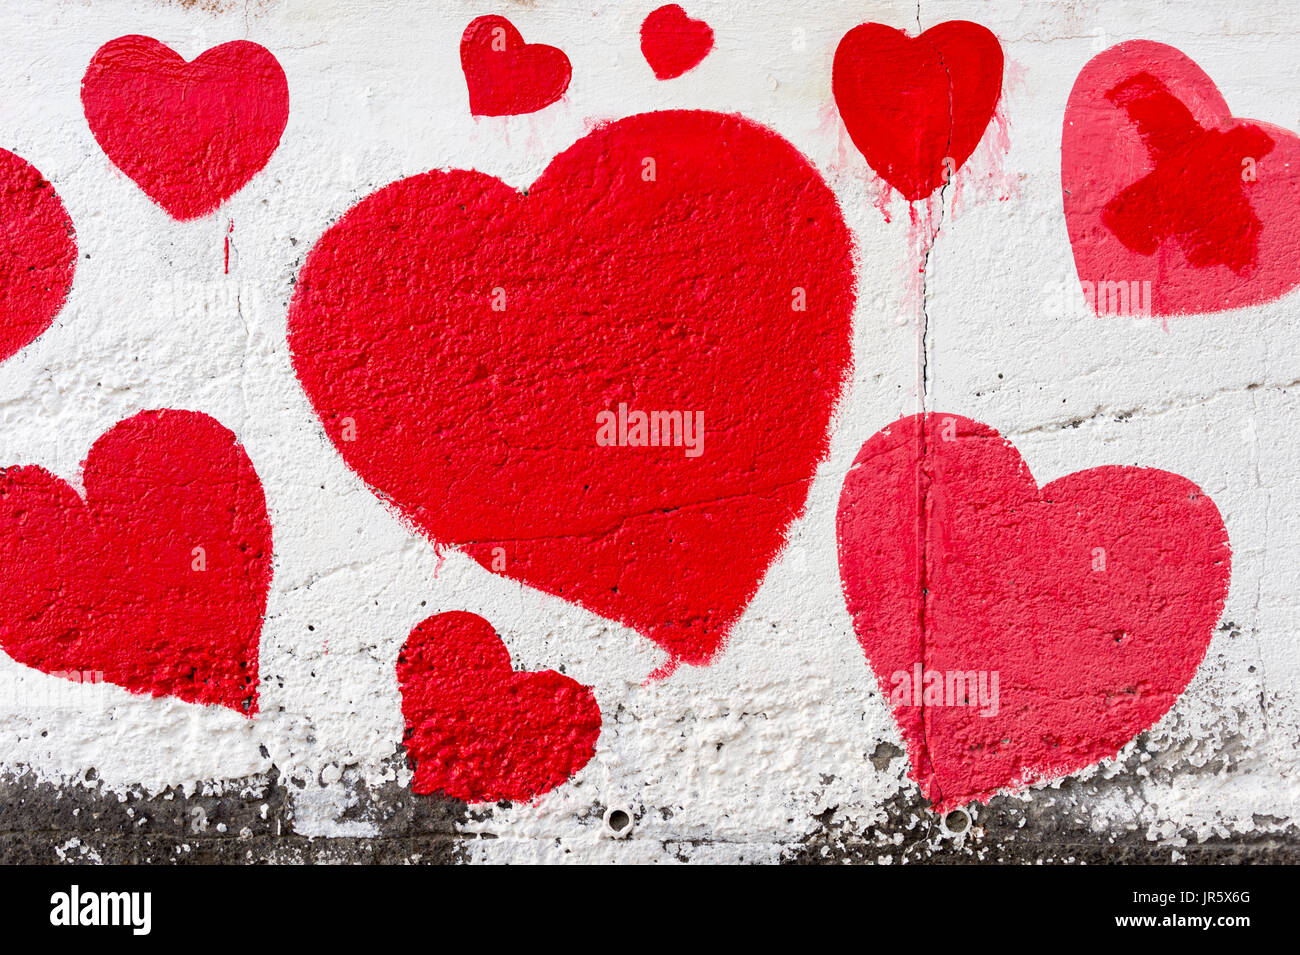 Many hearts painted on a wall Stock Photo